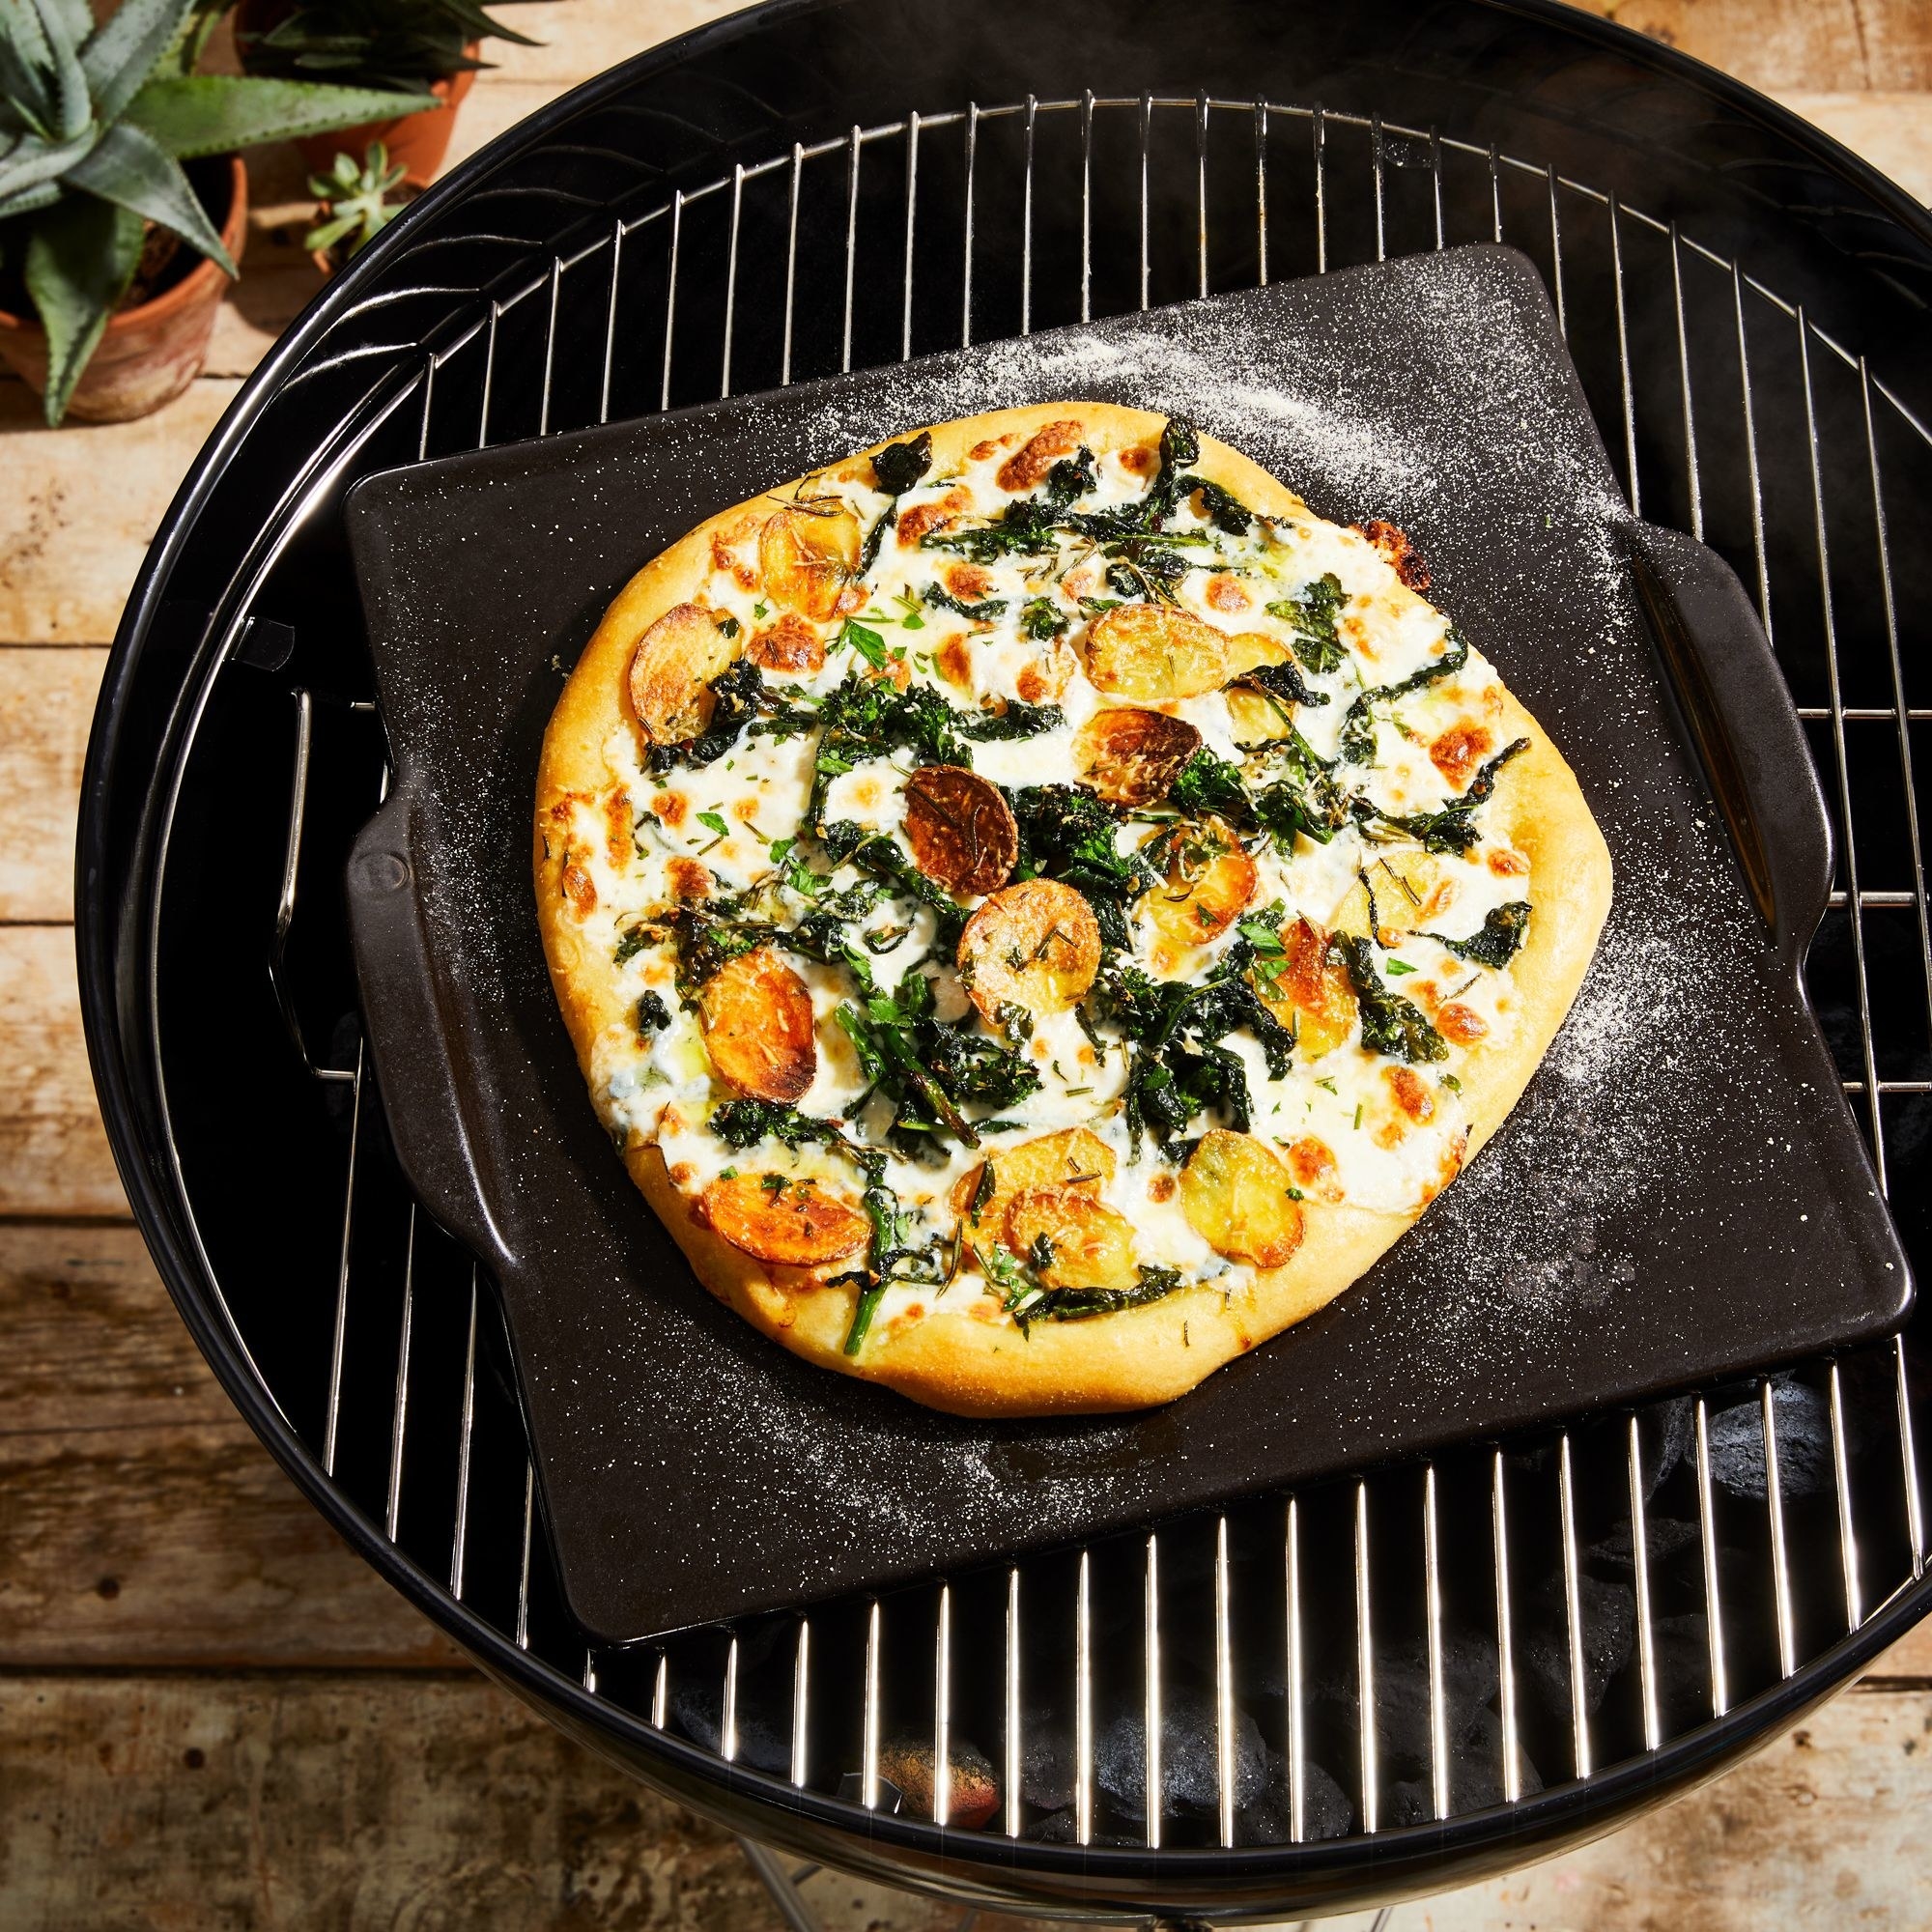 A pizza cooking on the ceramic pizza stone on a grill.